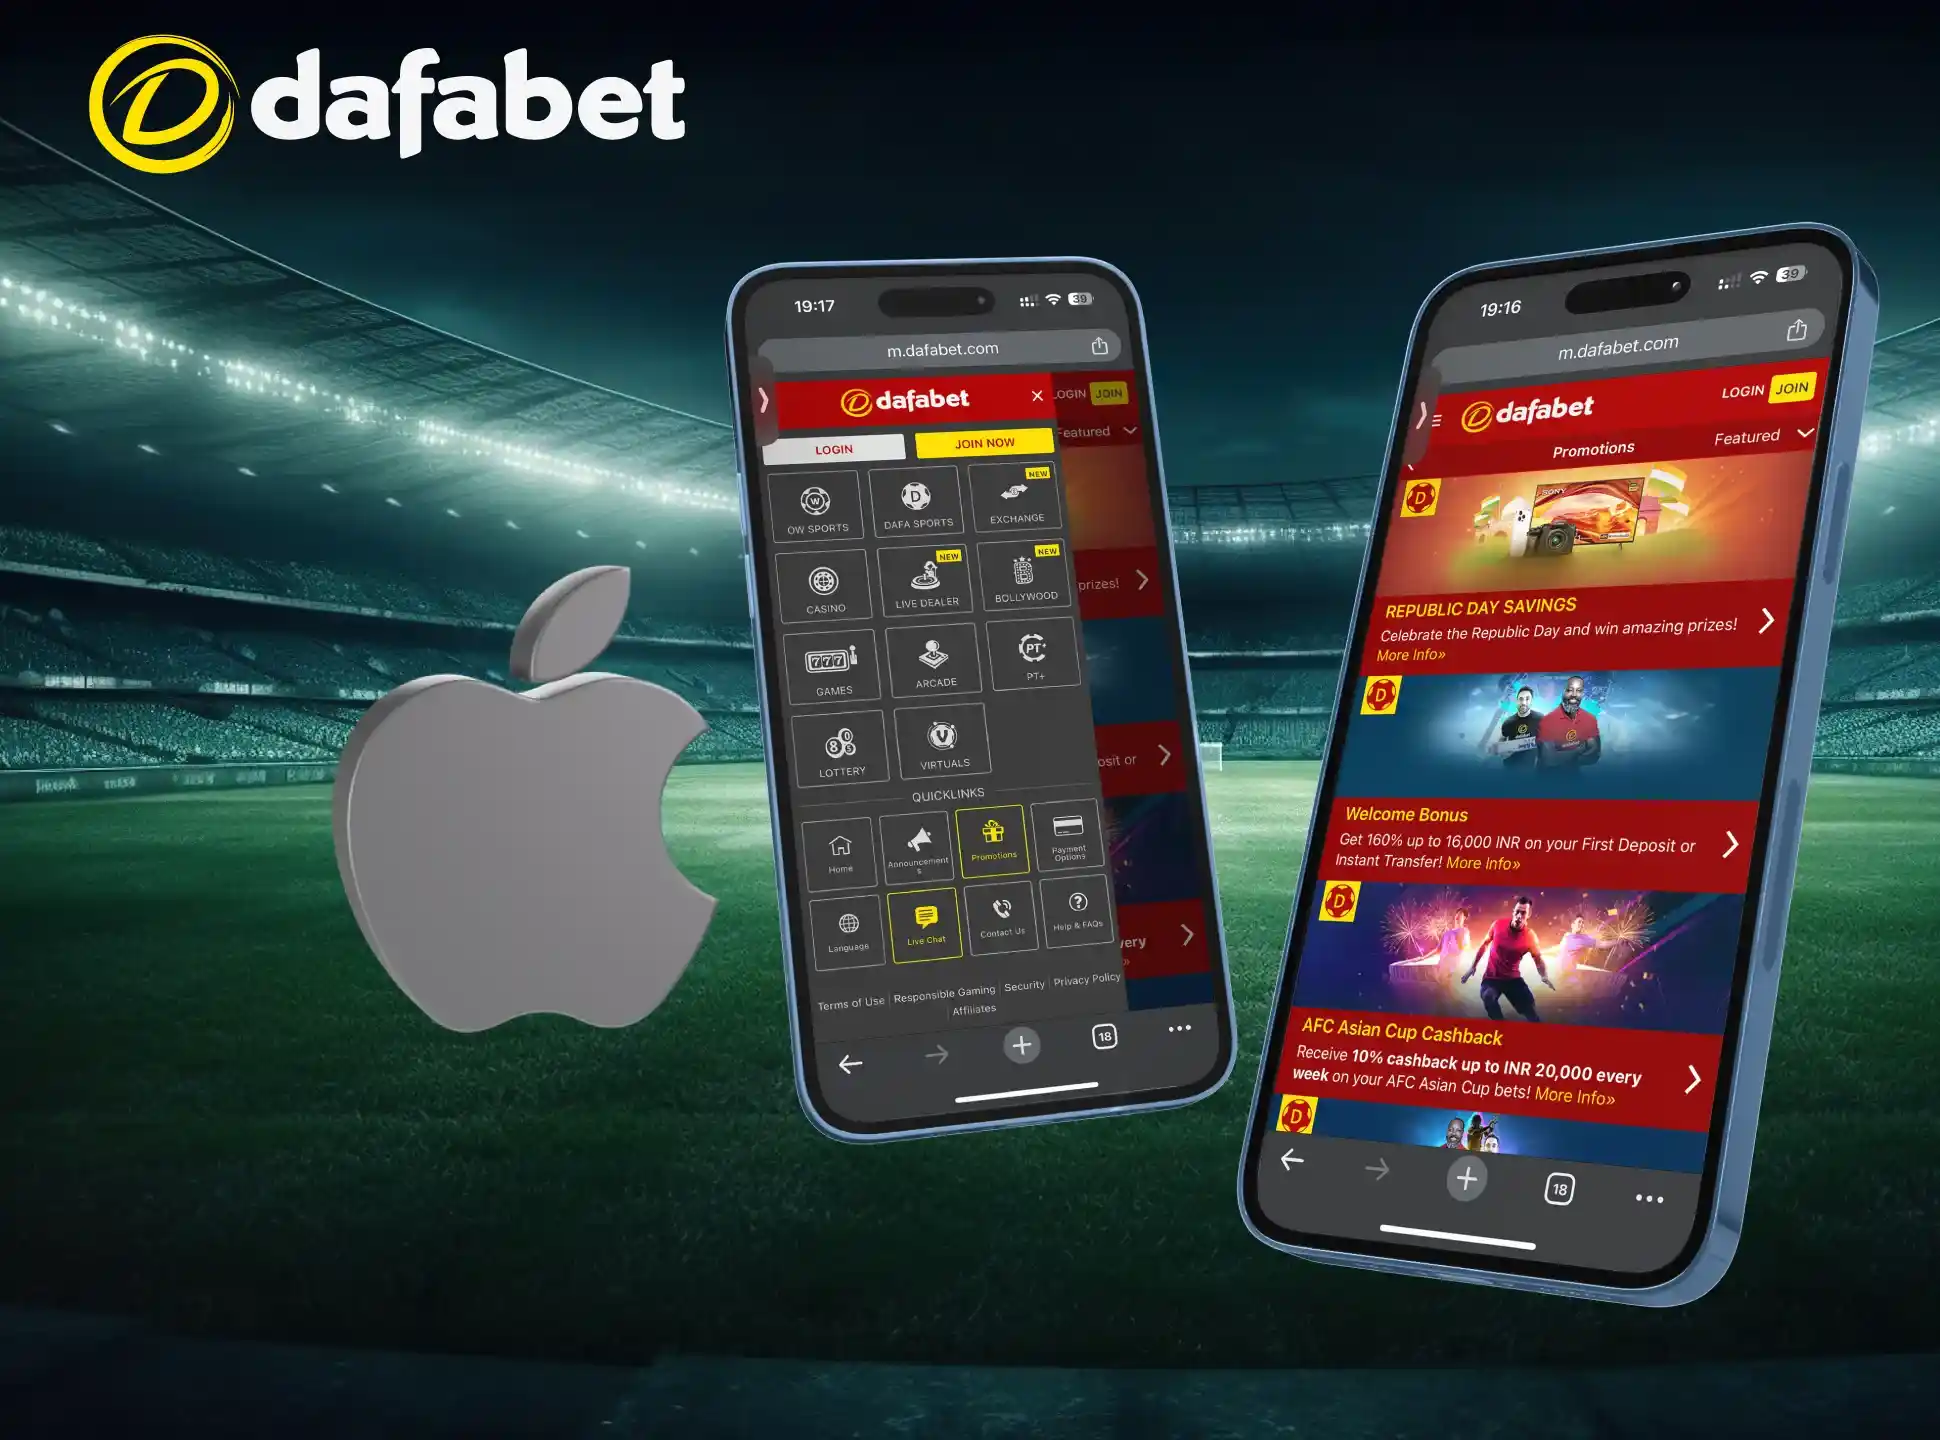 The Dafabet mobile app is compatible with the iOS operating system.